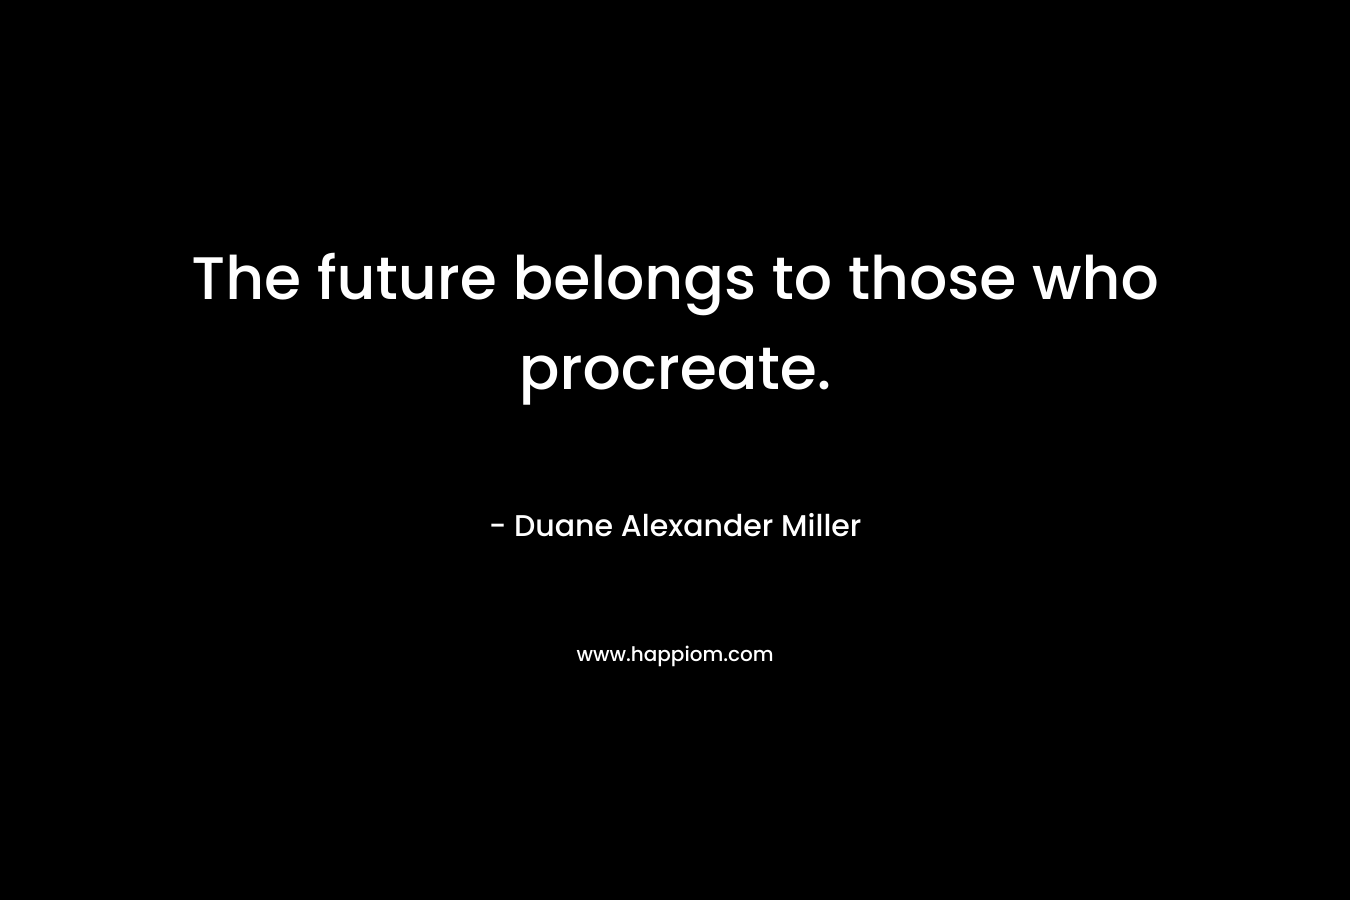 The future belongs to those who procreate. – Duane Alexander Miller